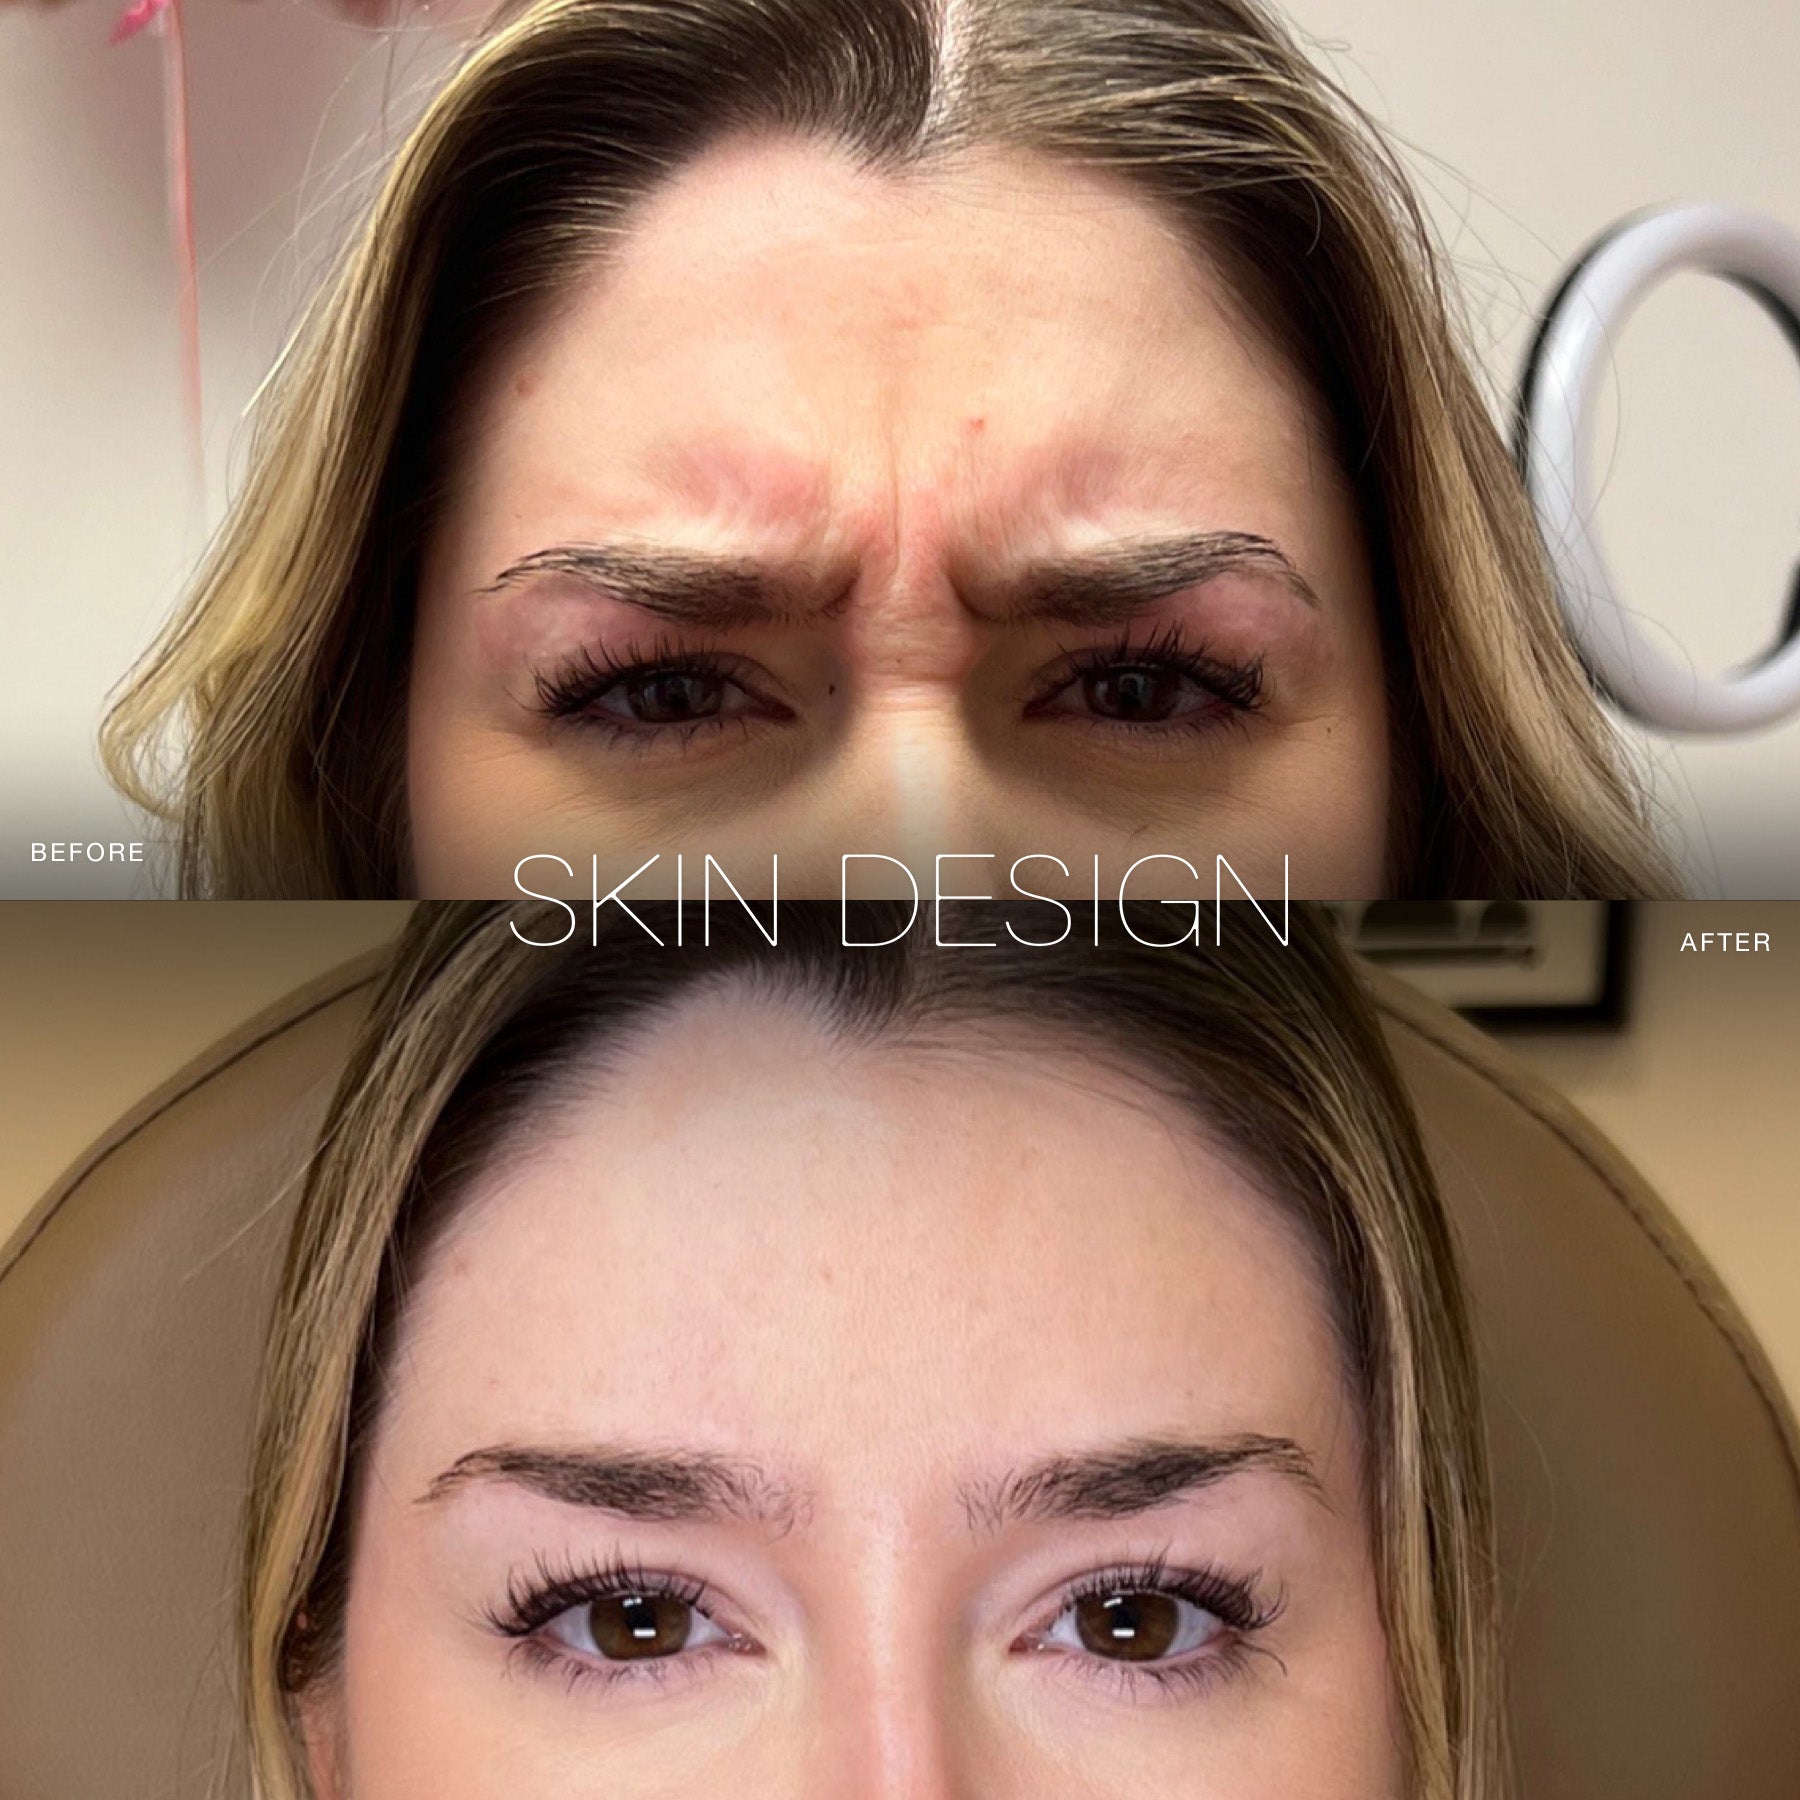 wrinkle relaxers botox dysport before and after results for forehead lines skin design aesthetics medical spa 